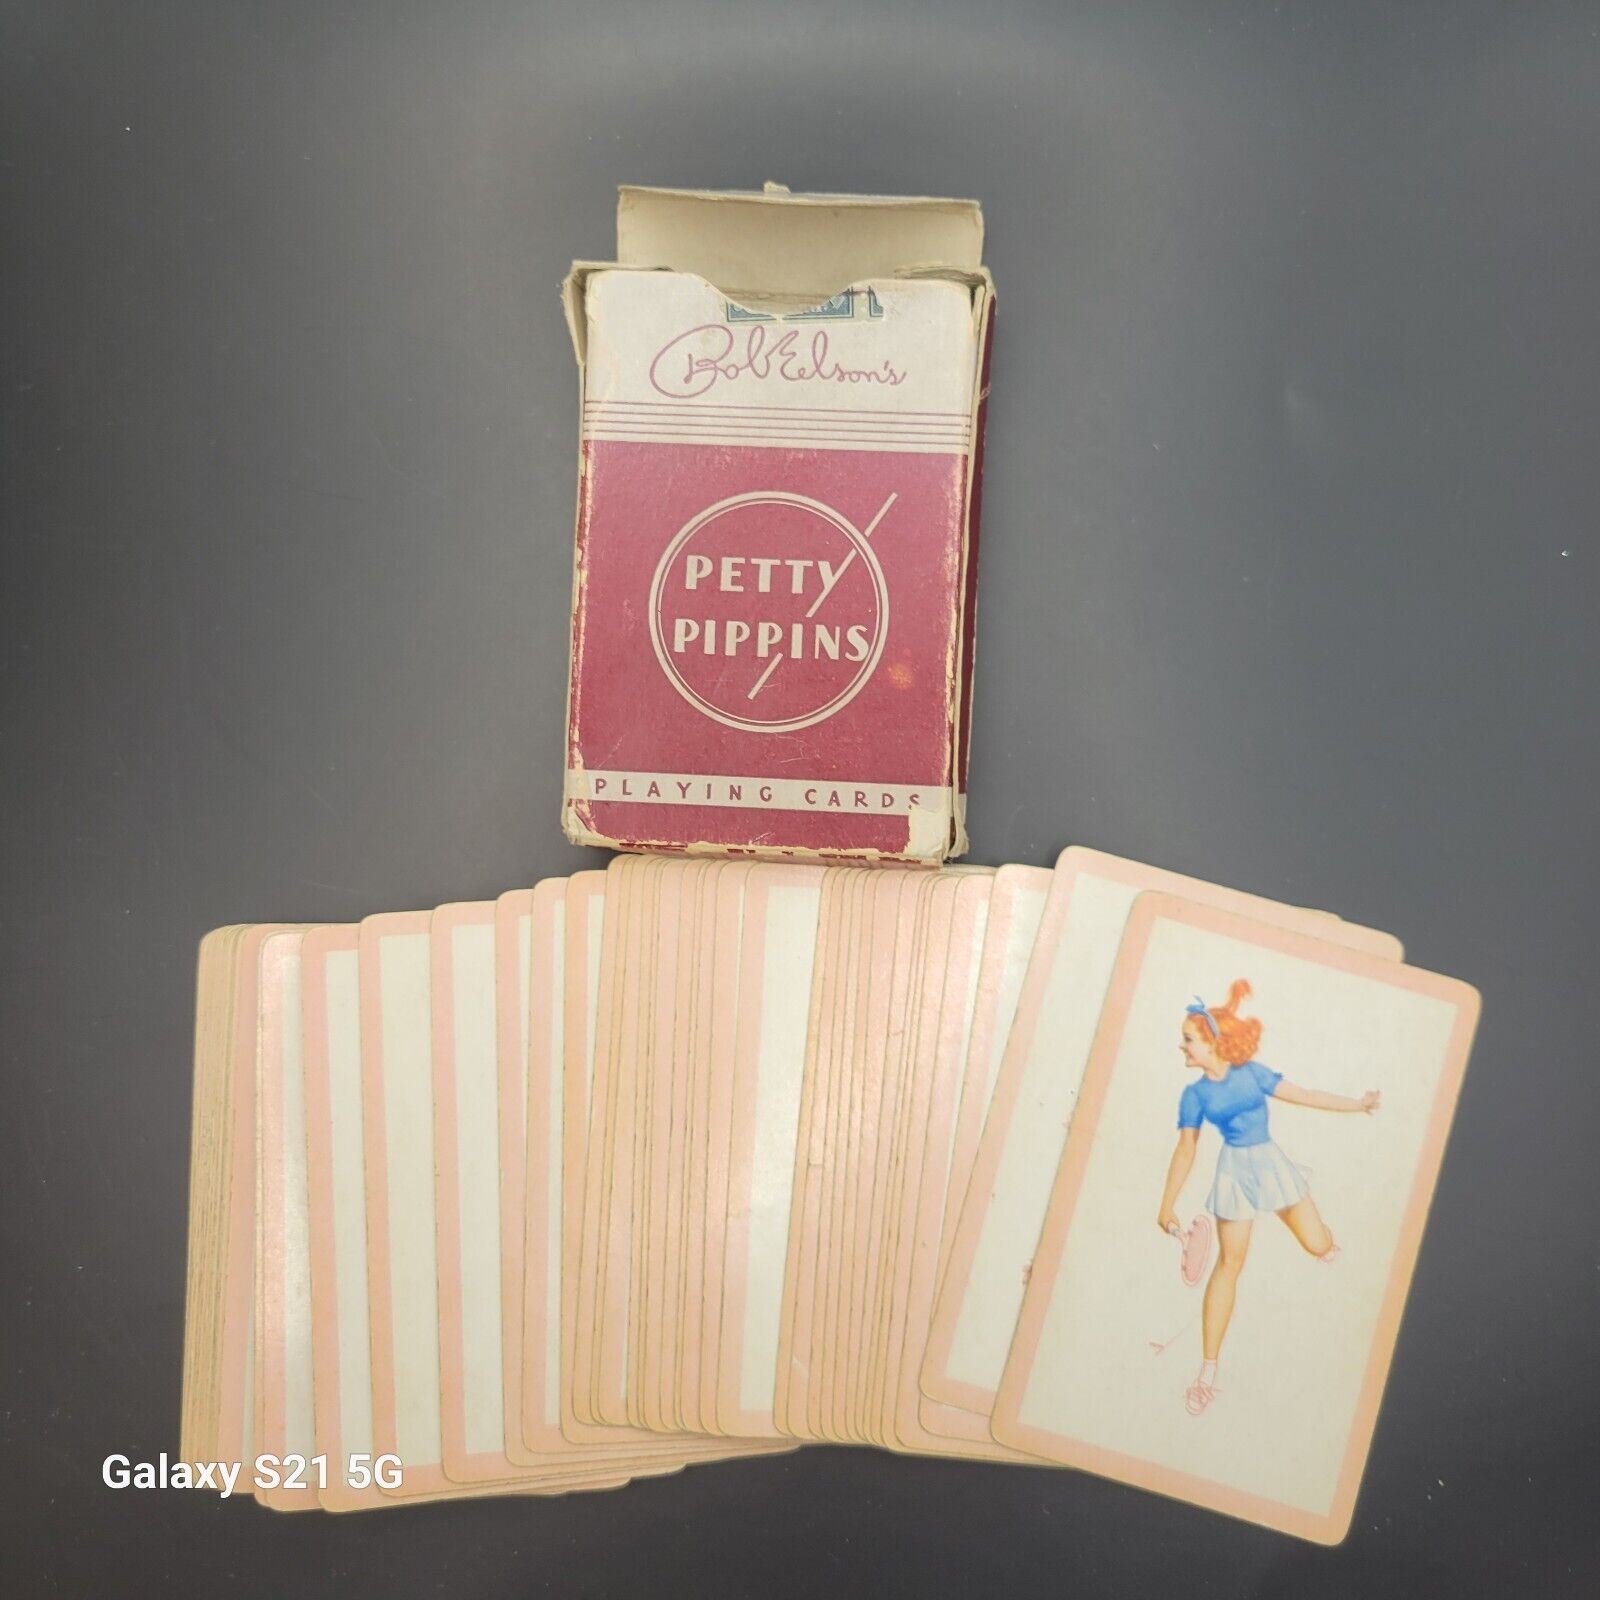 Bob Elson\'s 1940\'s Petty Pippins Vintage Playing Cards Deck Rare Collectable 